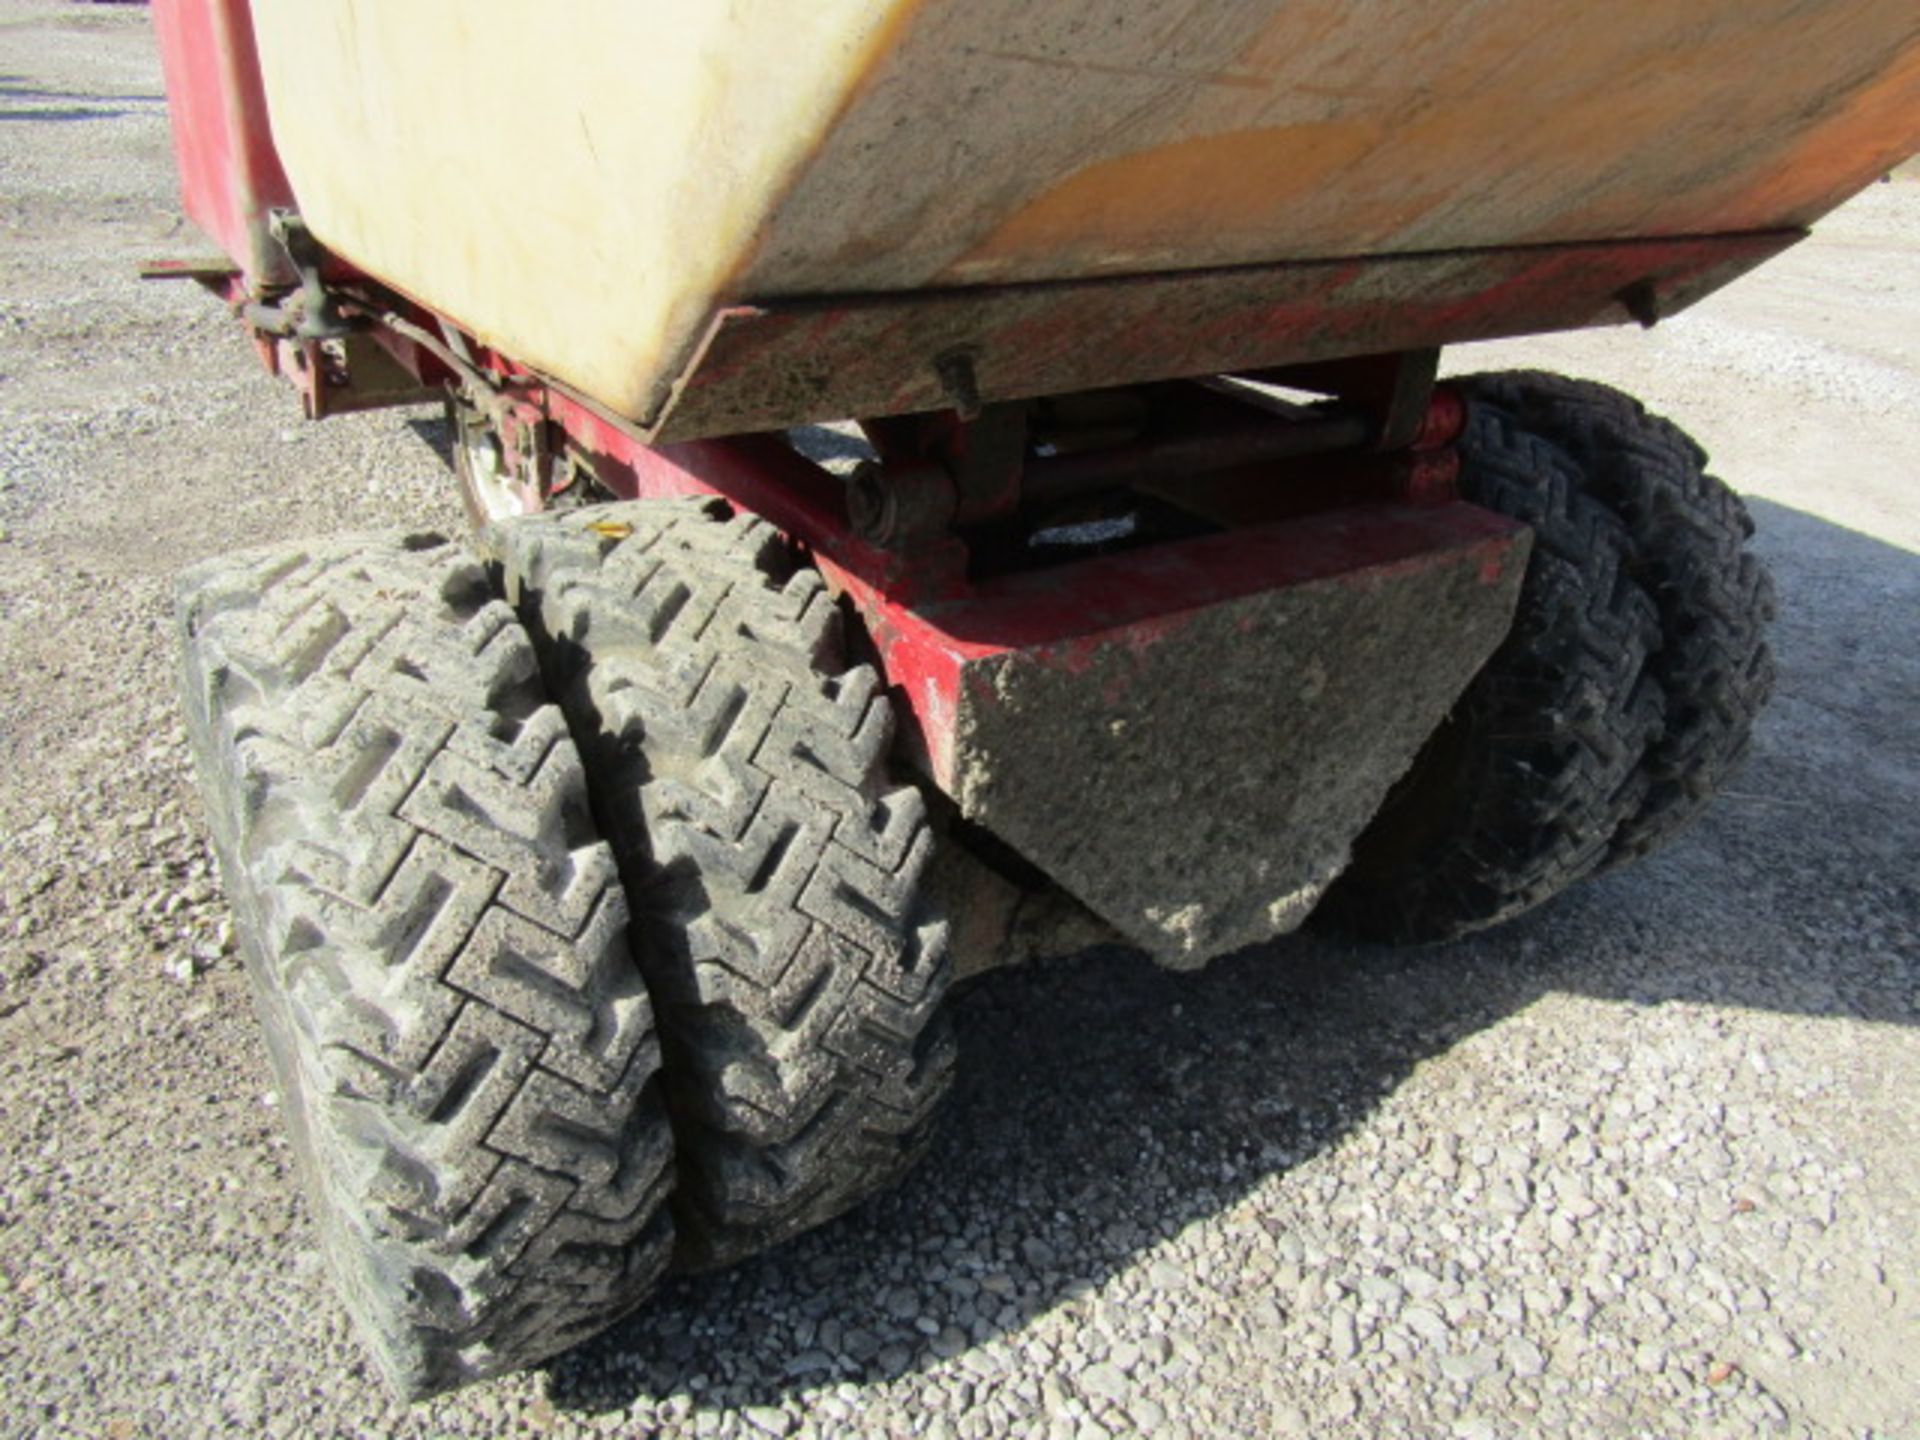 Whiteman Power Concrete Buggy, Model # OWAPB16R, Serial # 9606-36070, Located in Wildwood, MO - Image 6 of 6